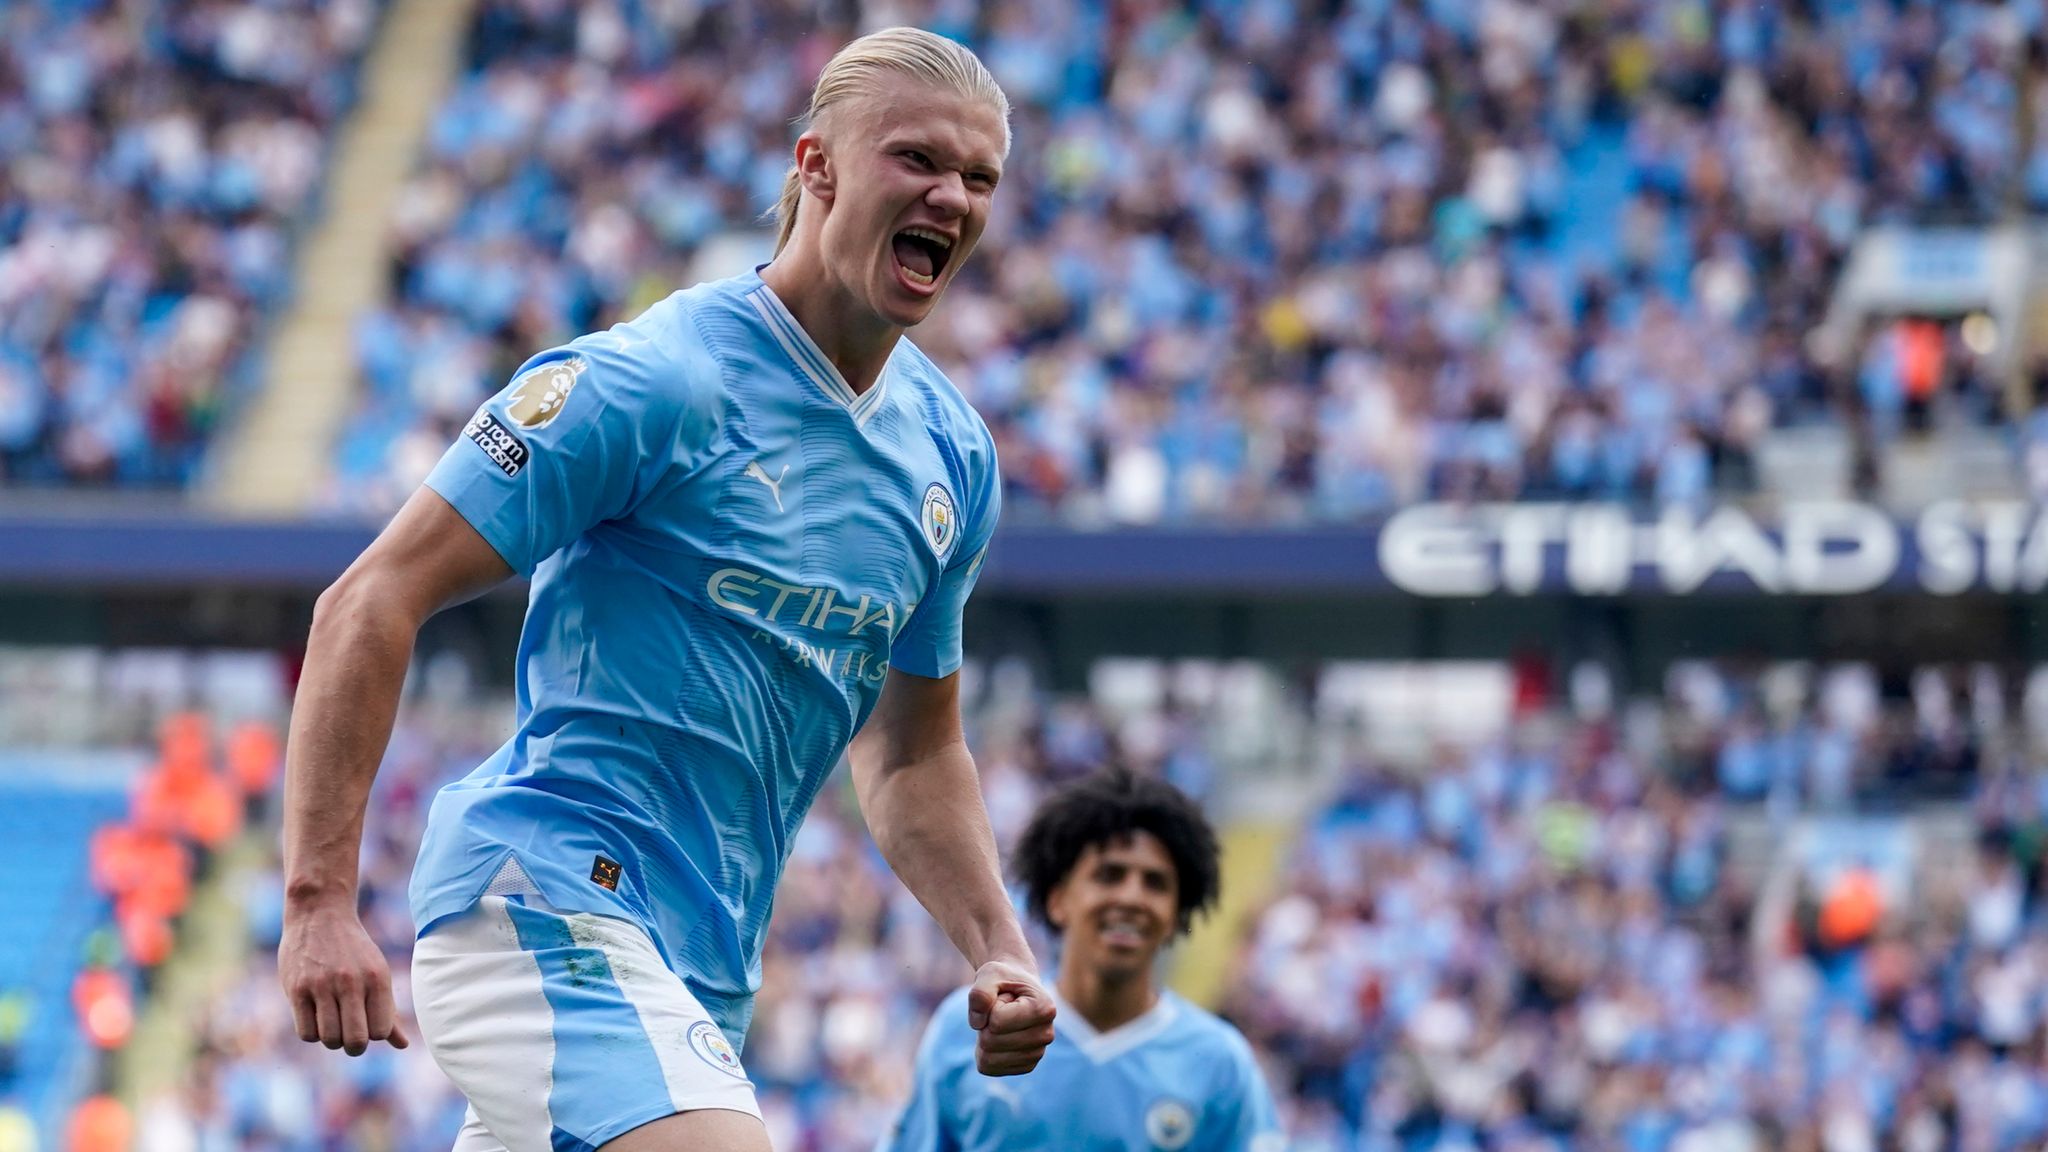 Erling Haaland is the world's best player, and Man City are